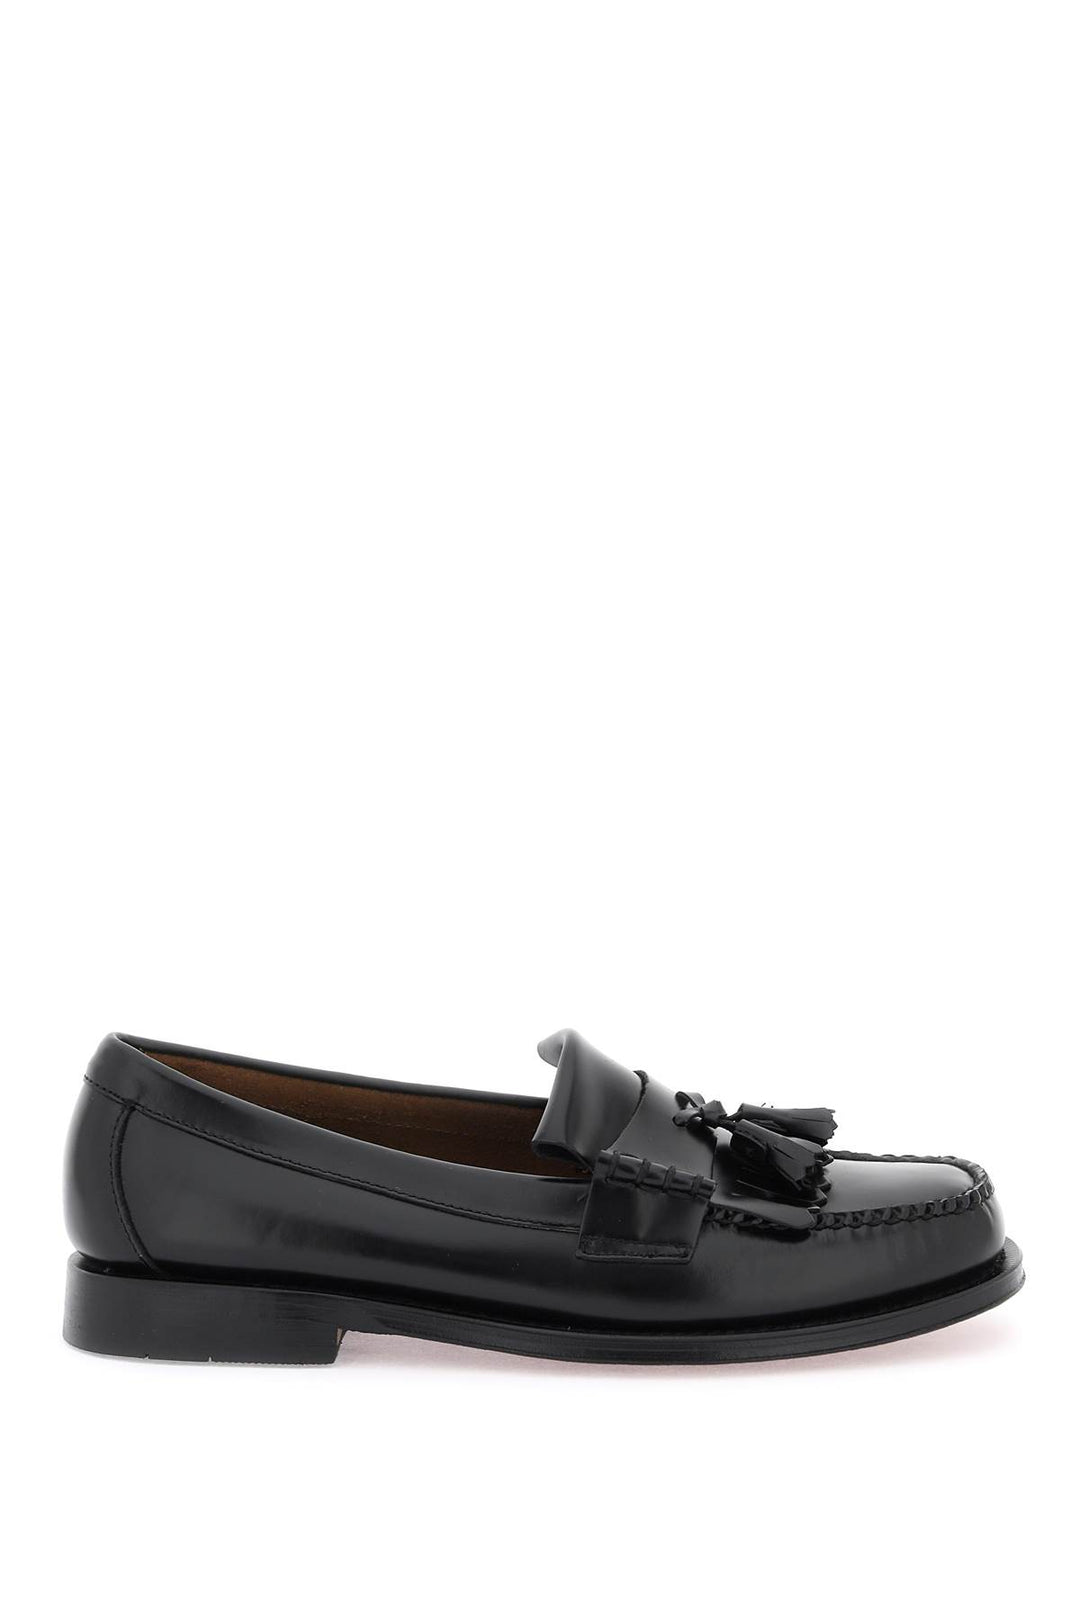 G.H. Bass Esther Kiltie Weejuns Loafers In Brushed Leather   Nero